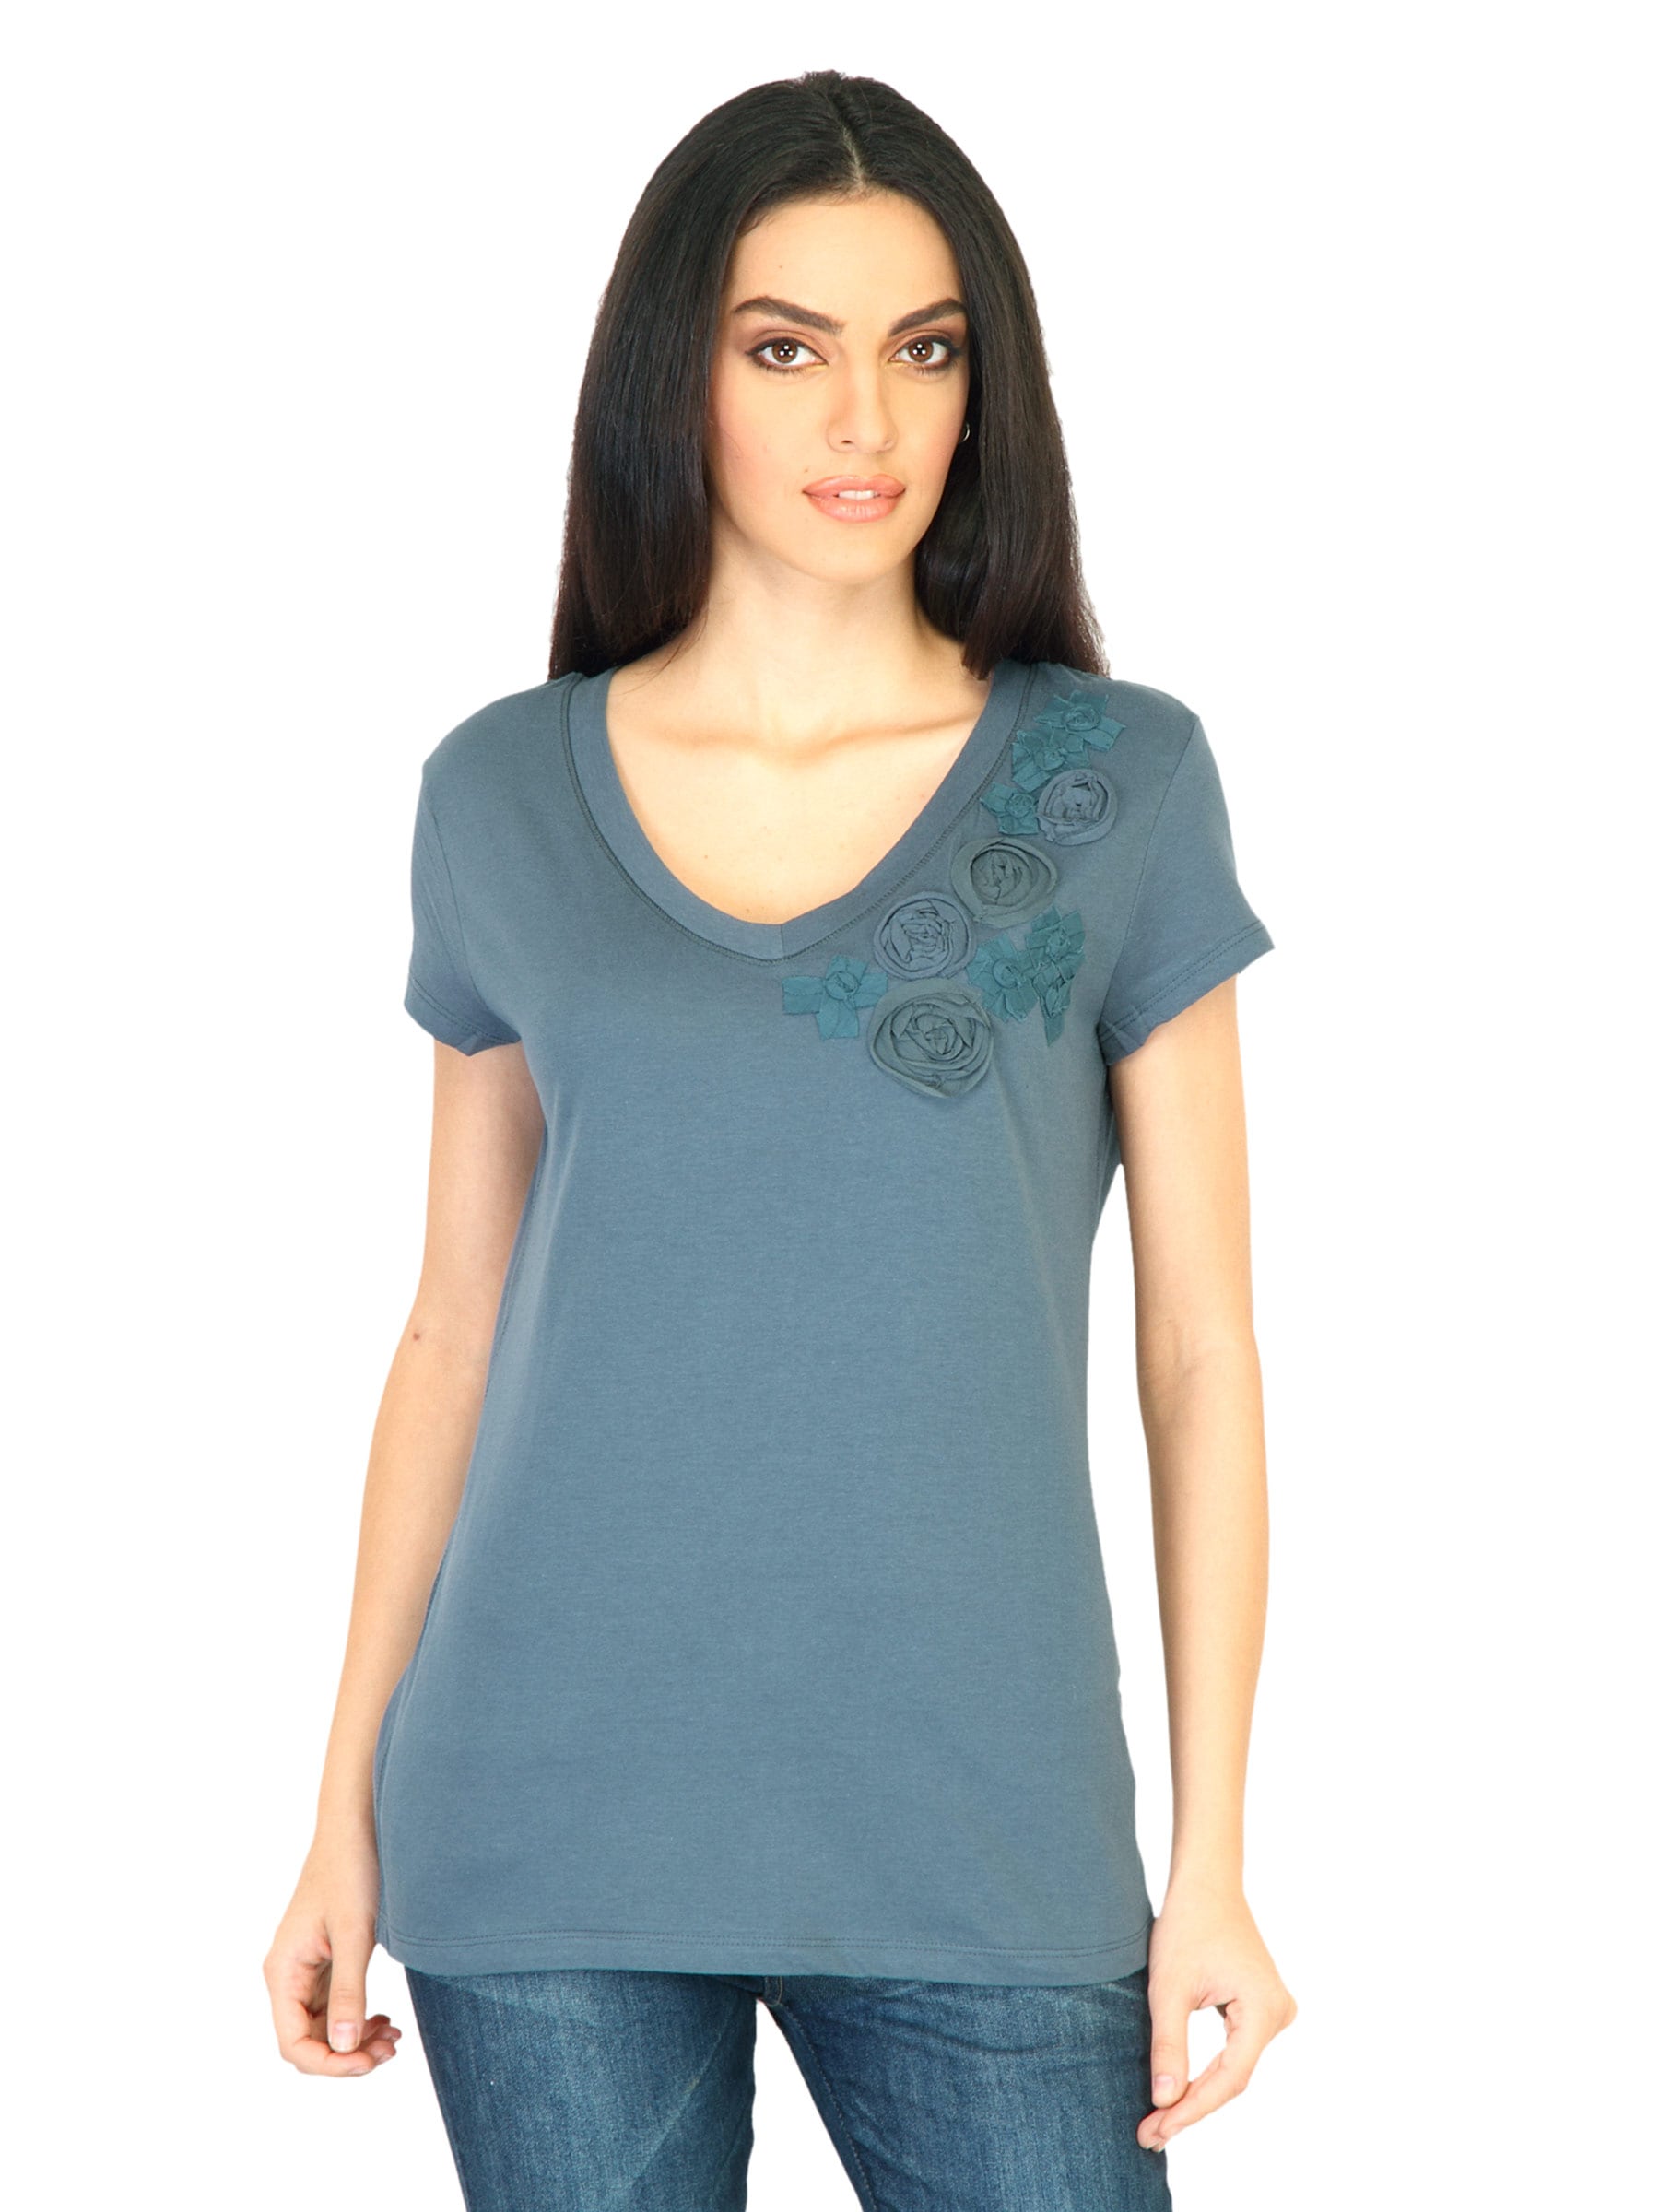 United Colors of Benetton Women Solid Blue Tops